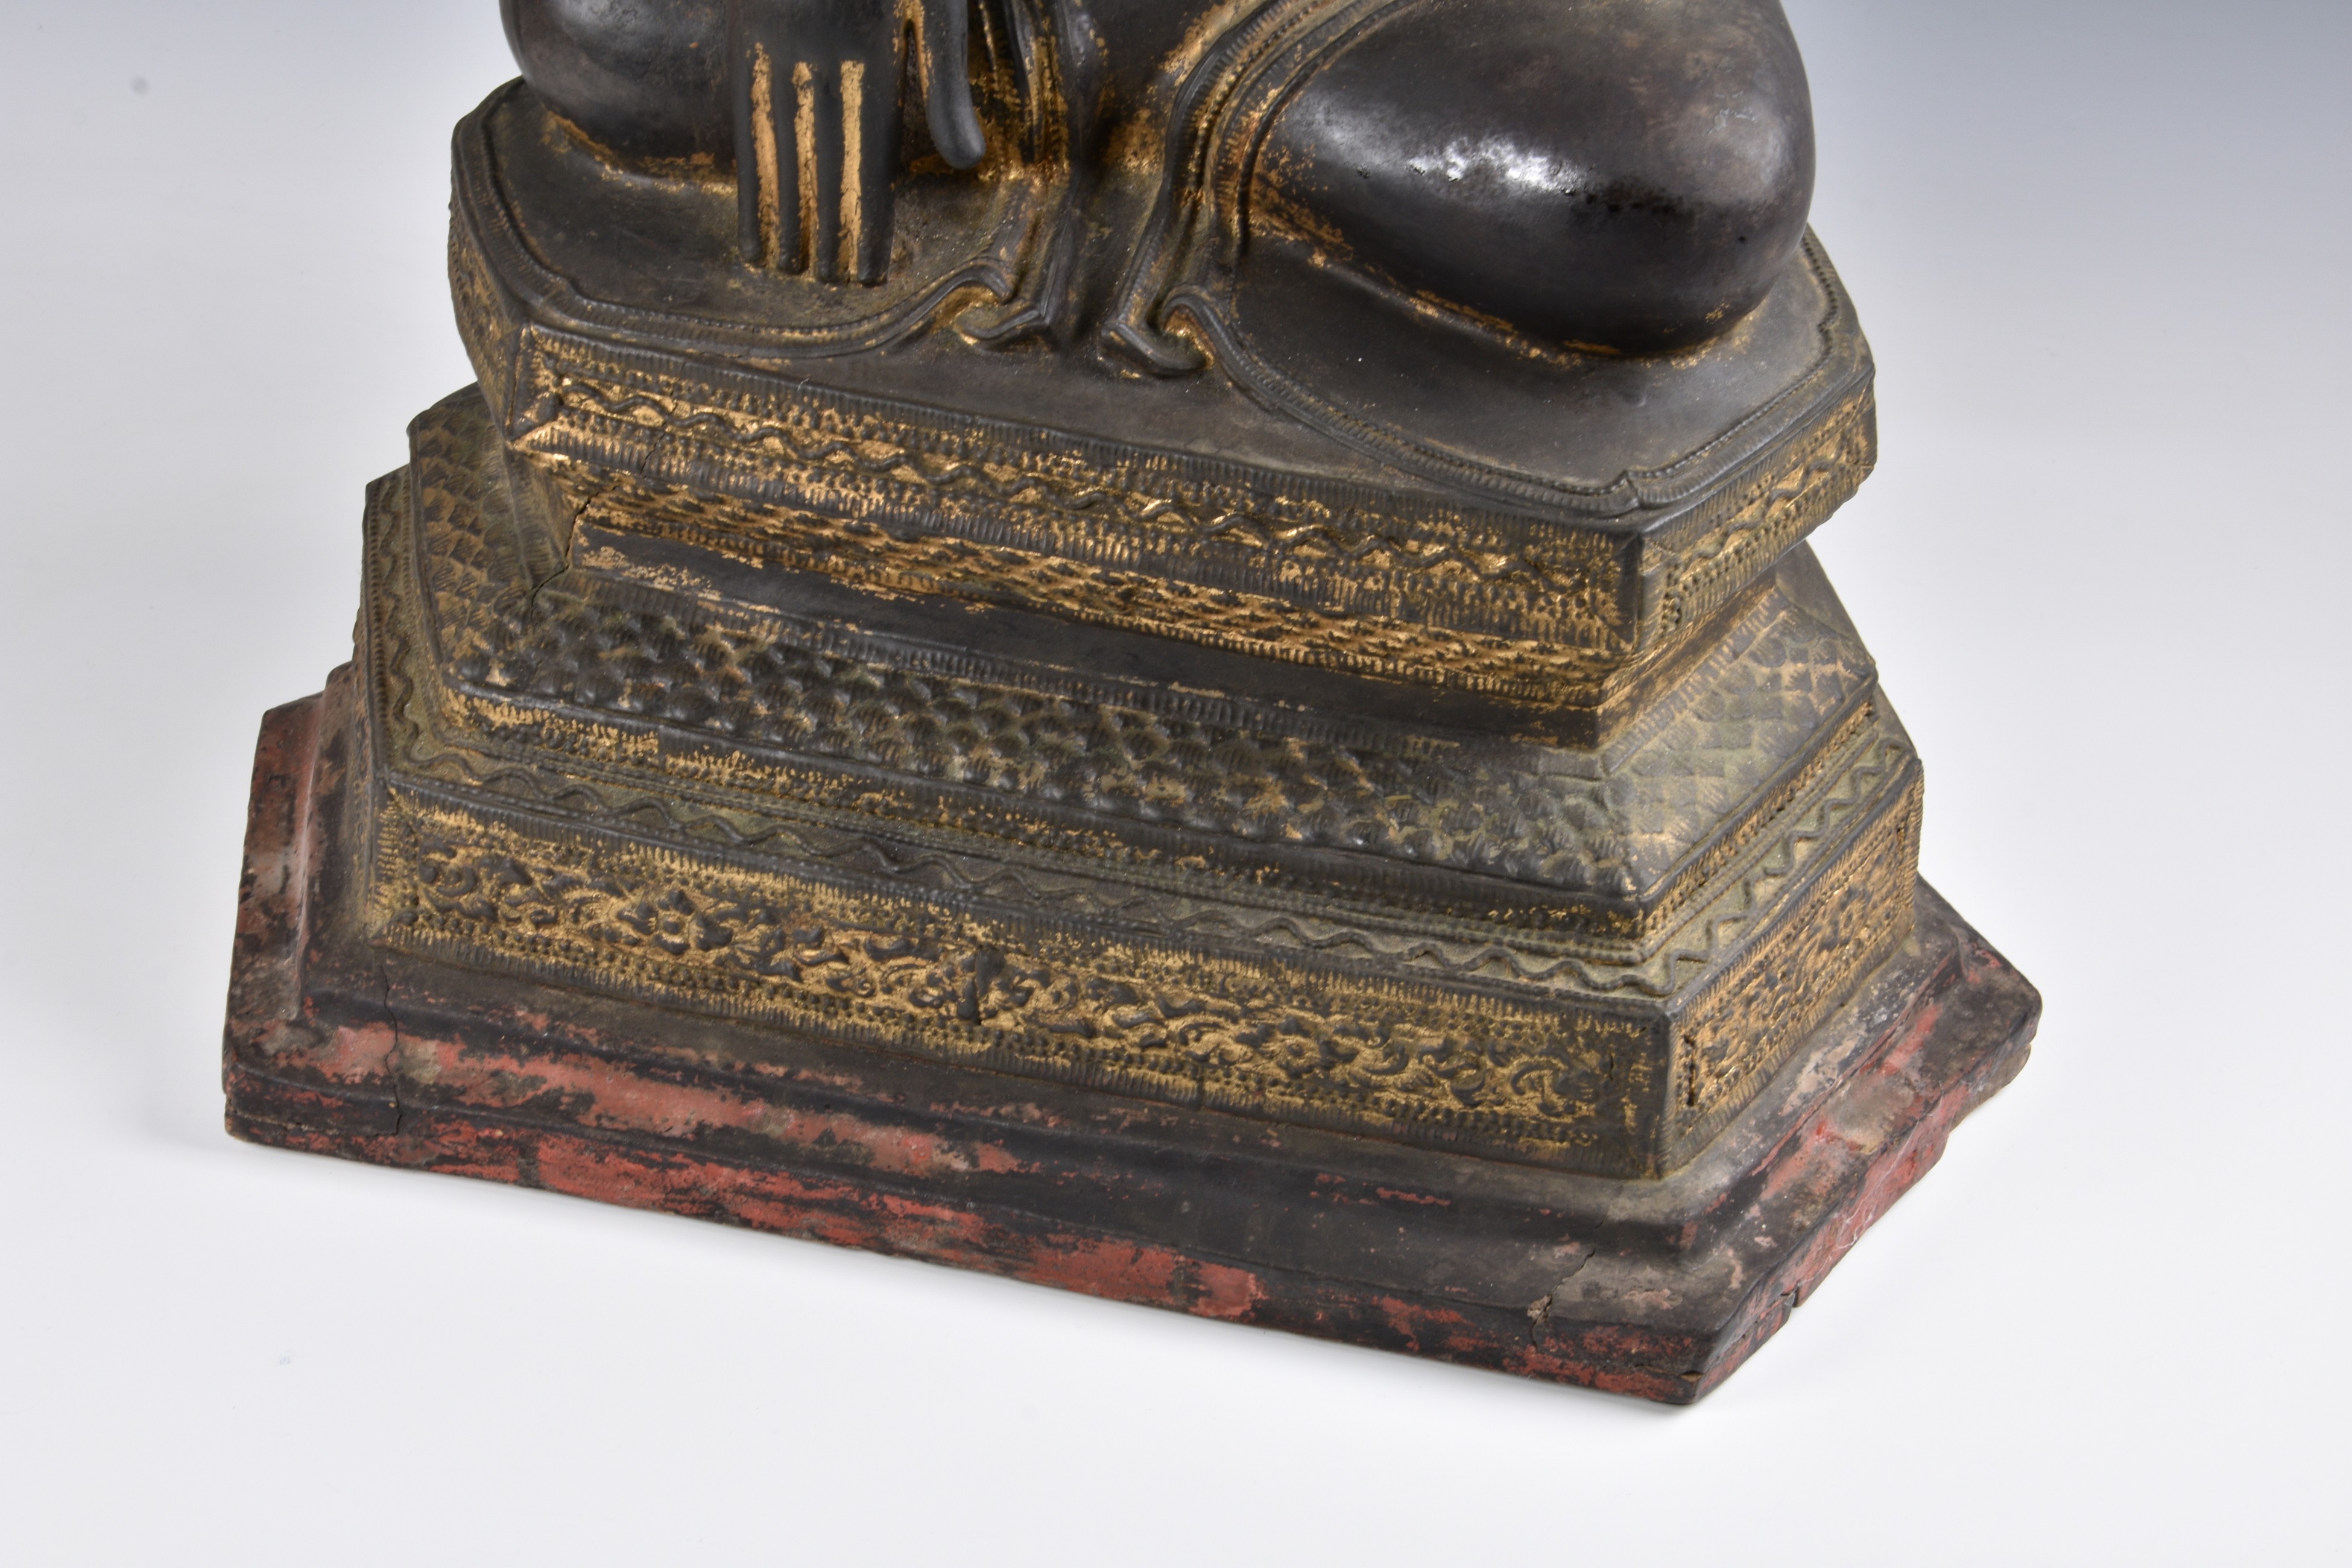 A 19th century Burmese Mandalay dry lacquer seated figure of Buddha - Image 3 of 11